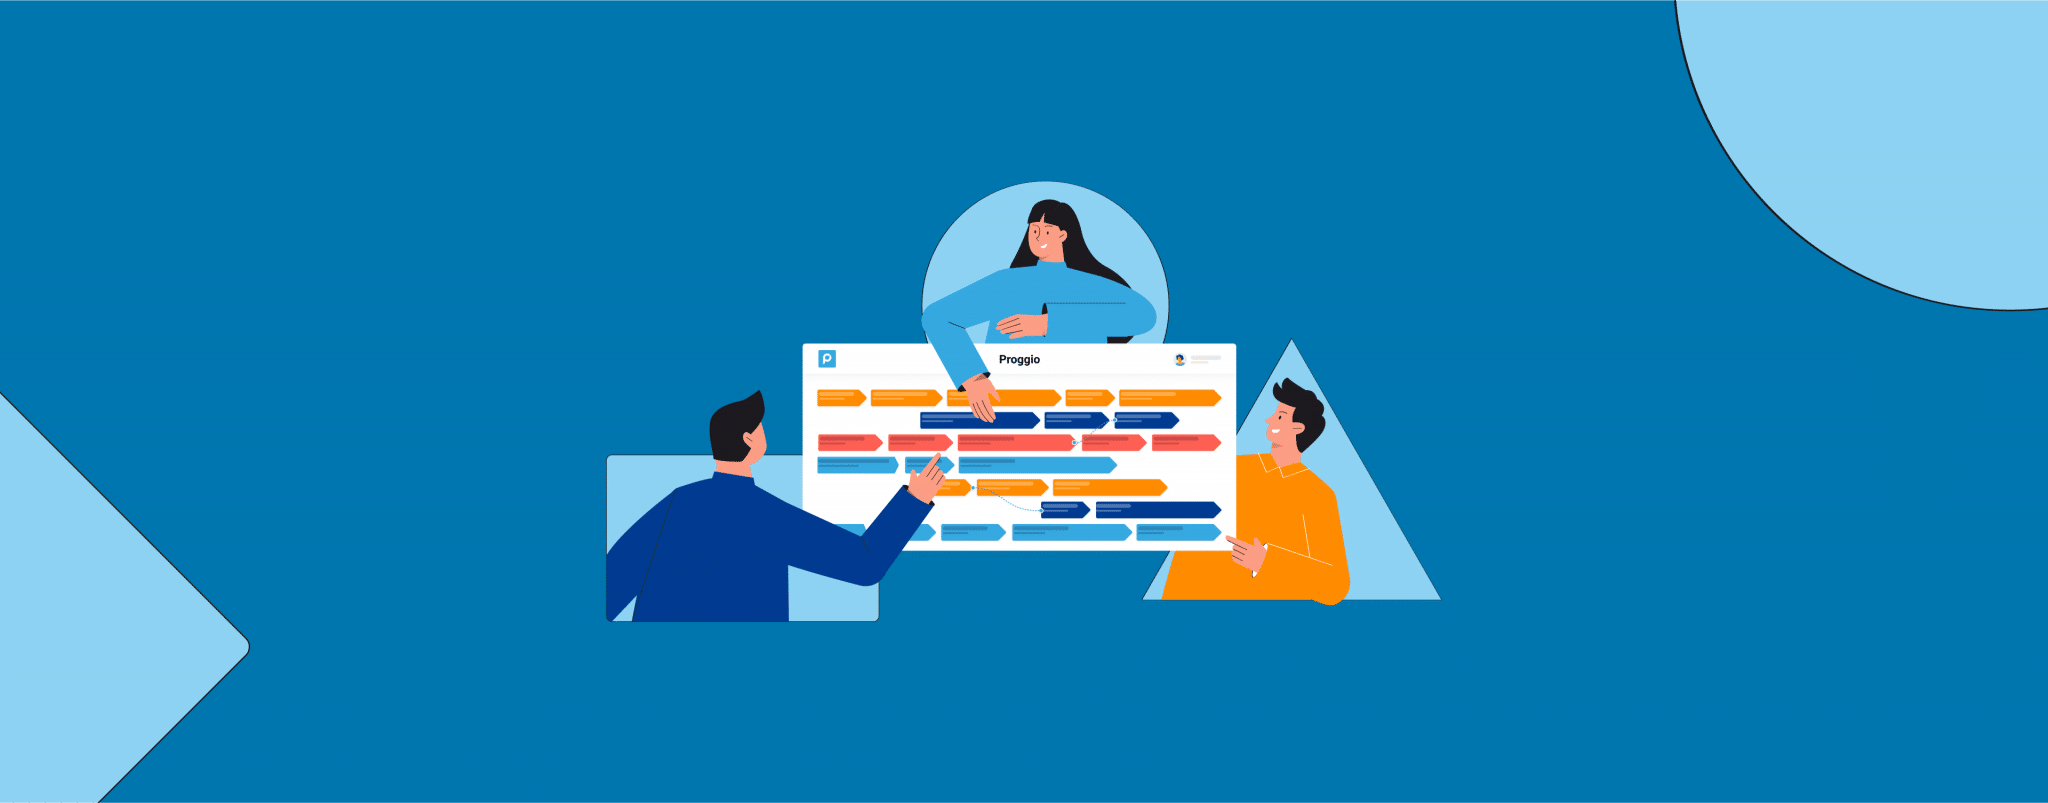 4 Tips How to Gain Managerial Alignment in Your Organization without Gantt Charts